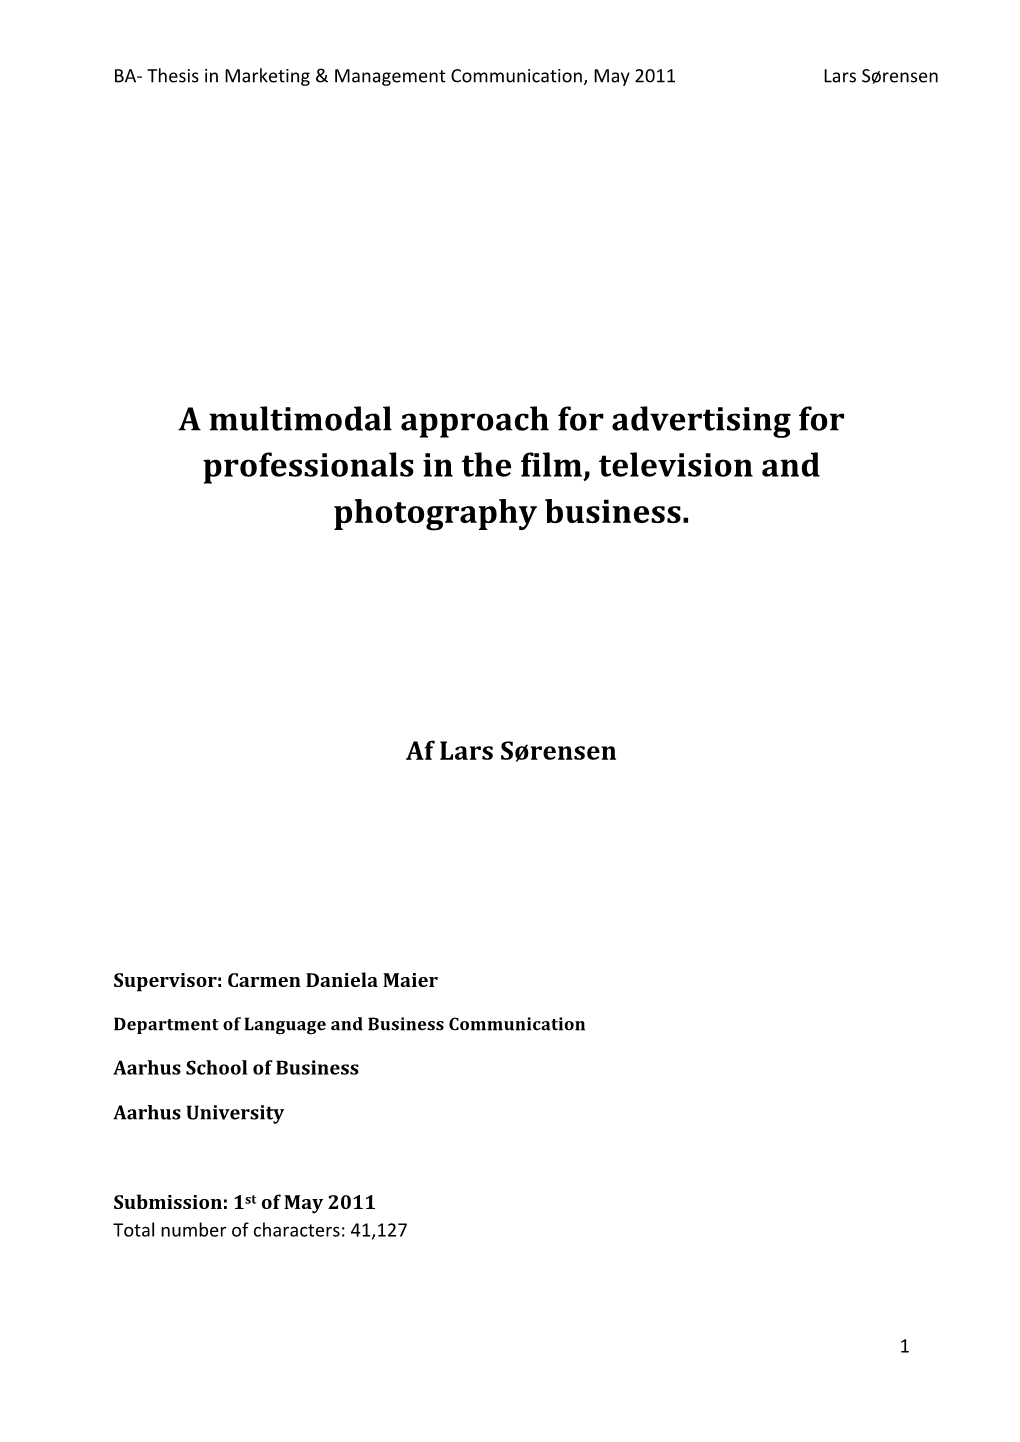 A Multimodal Approach for Advertising for Professionals in the Film, Television and Photography Business